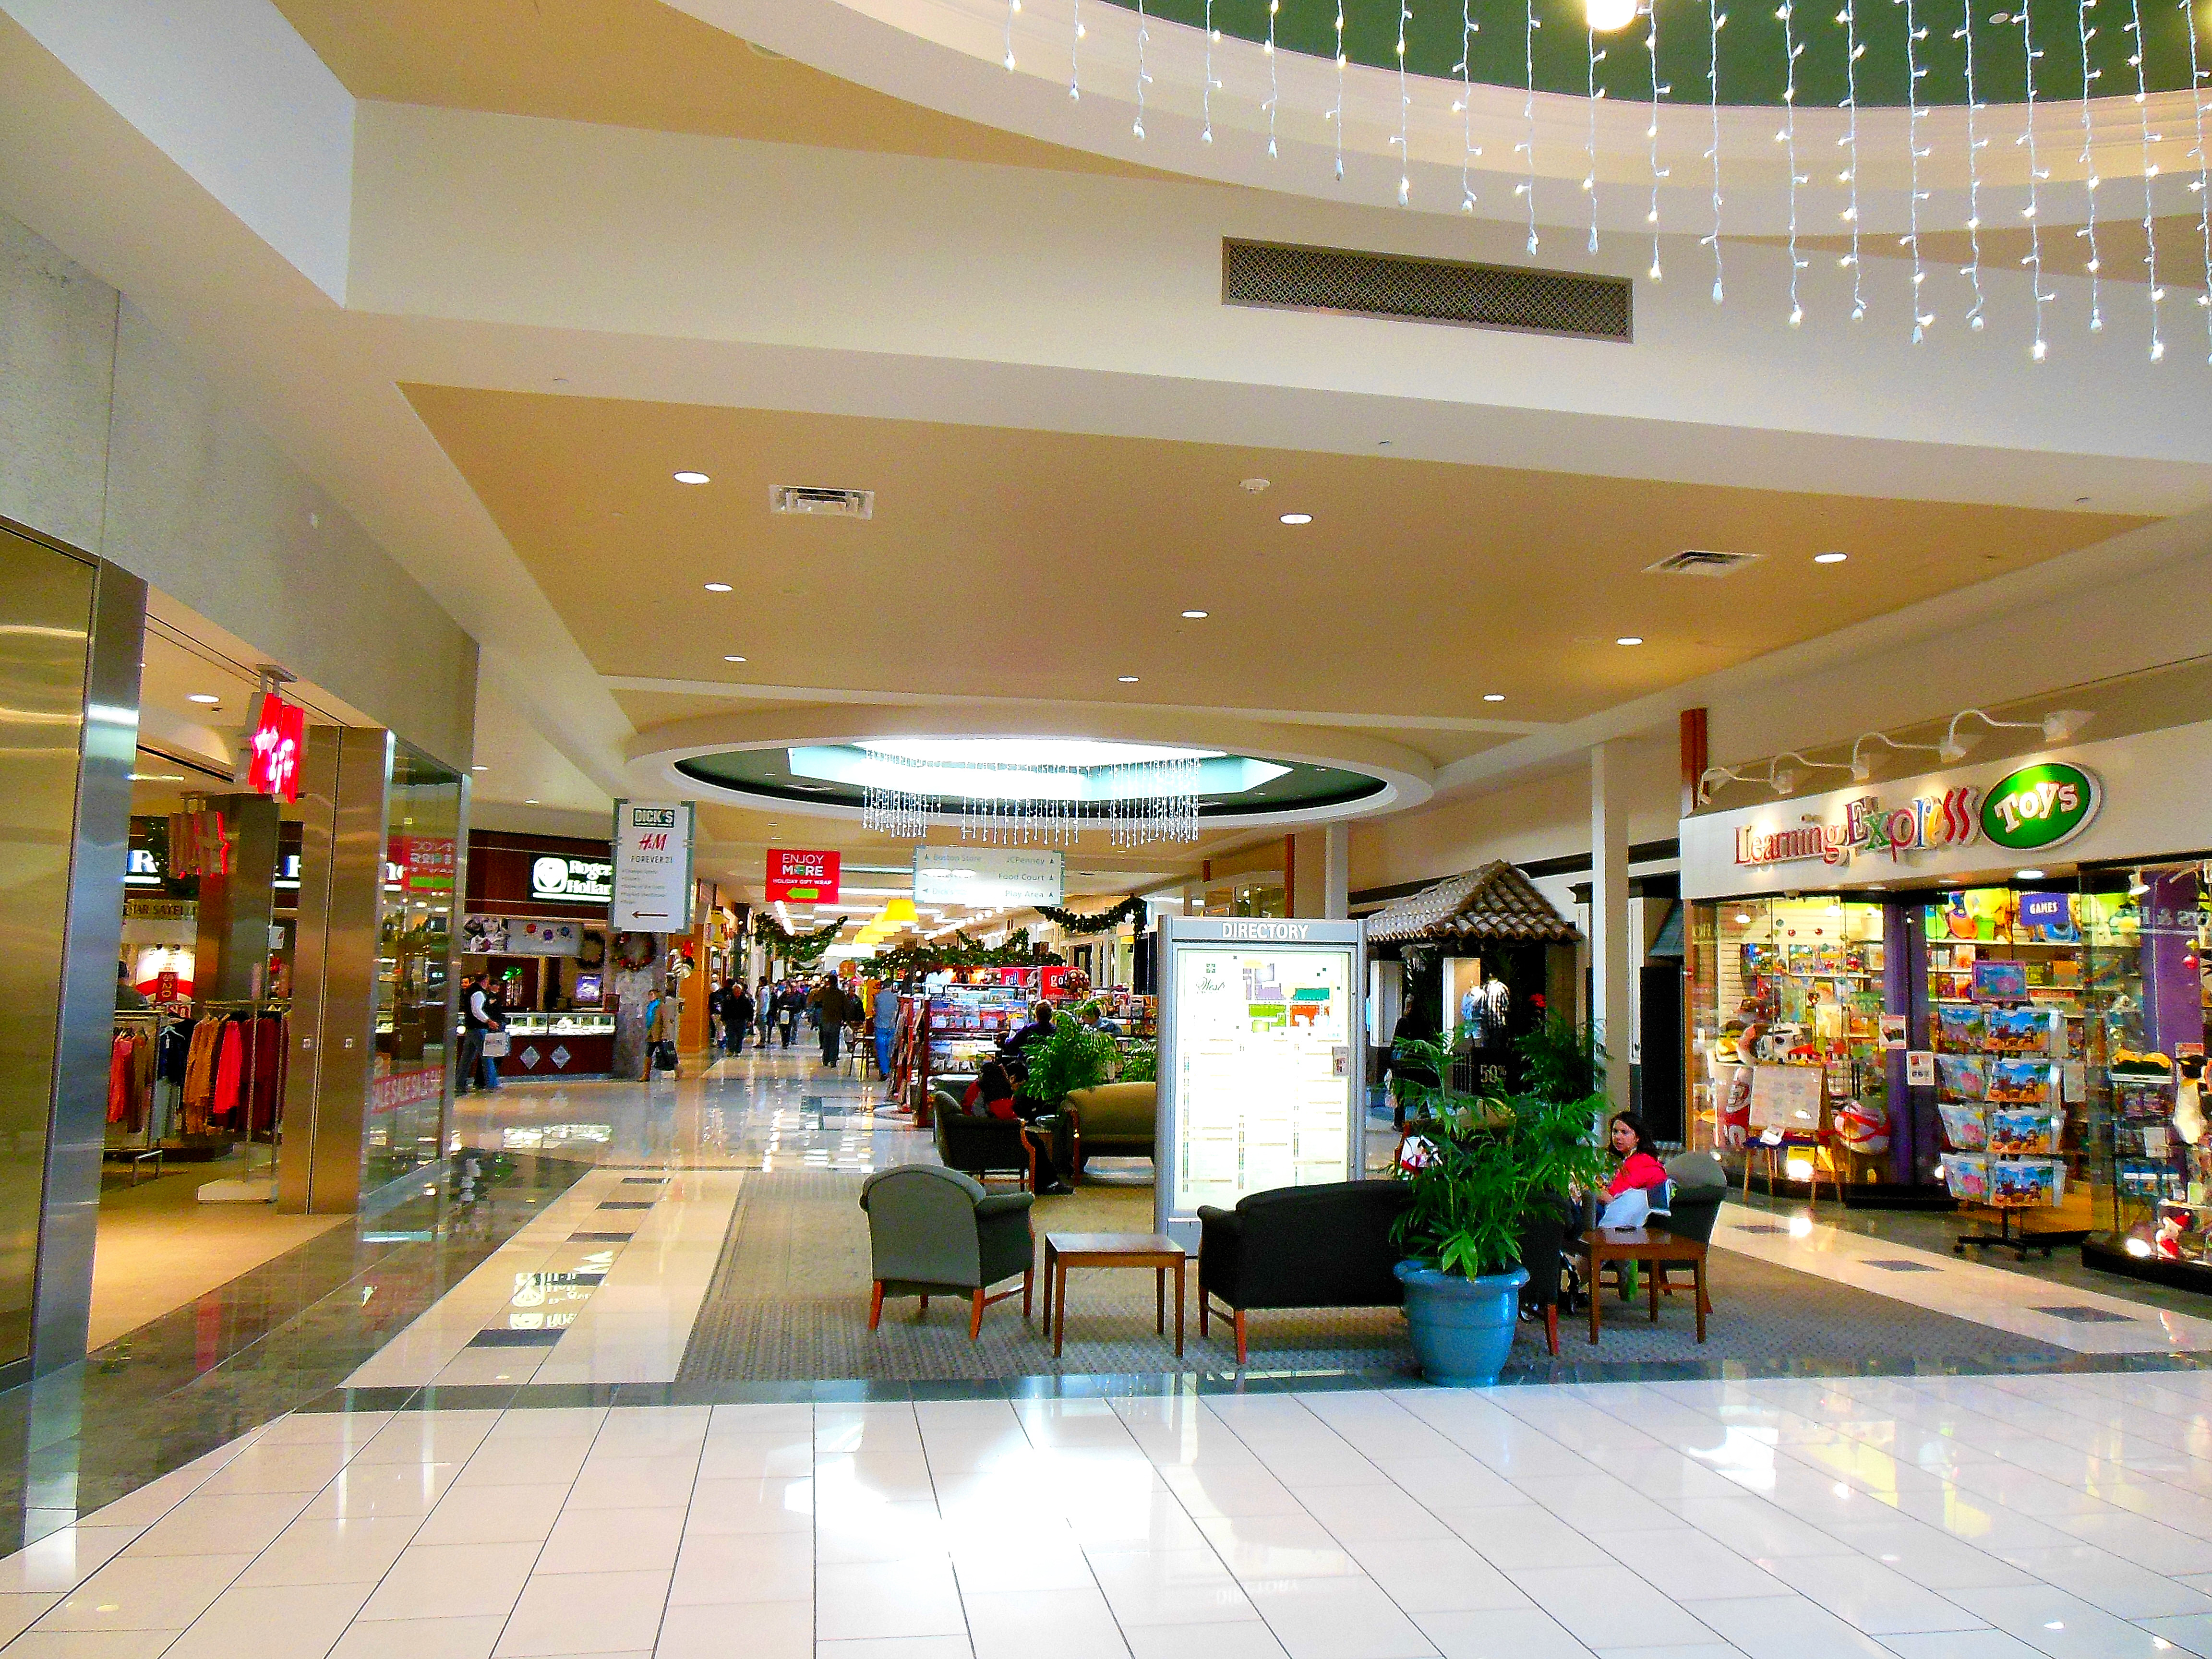 The Shops at Wisconsin Place ::: Store